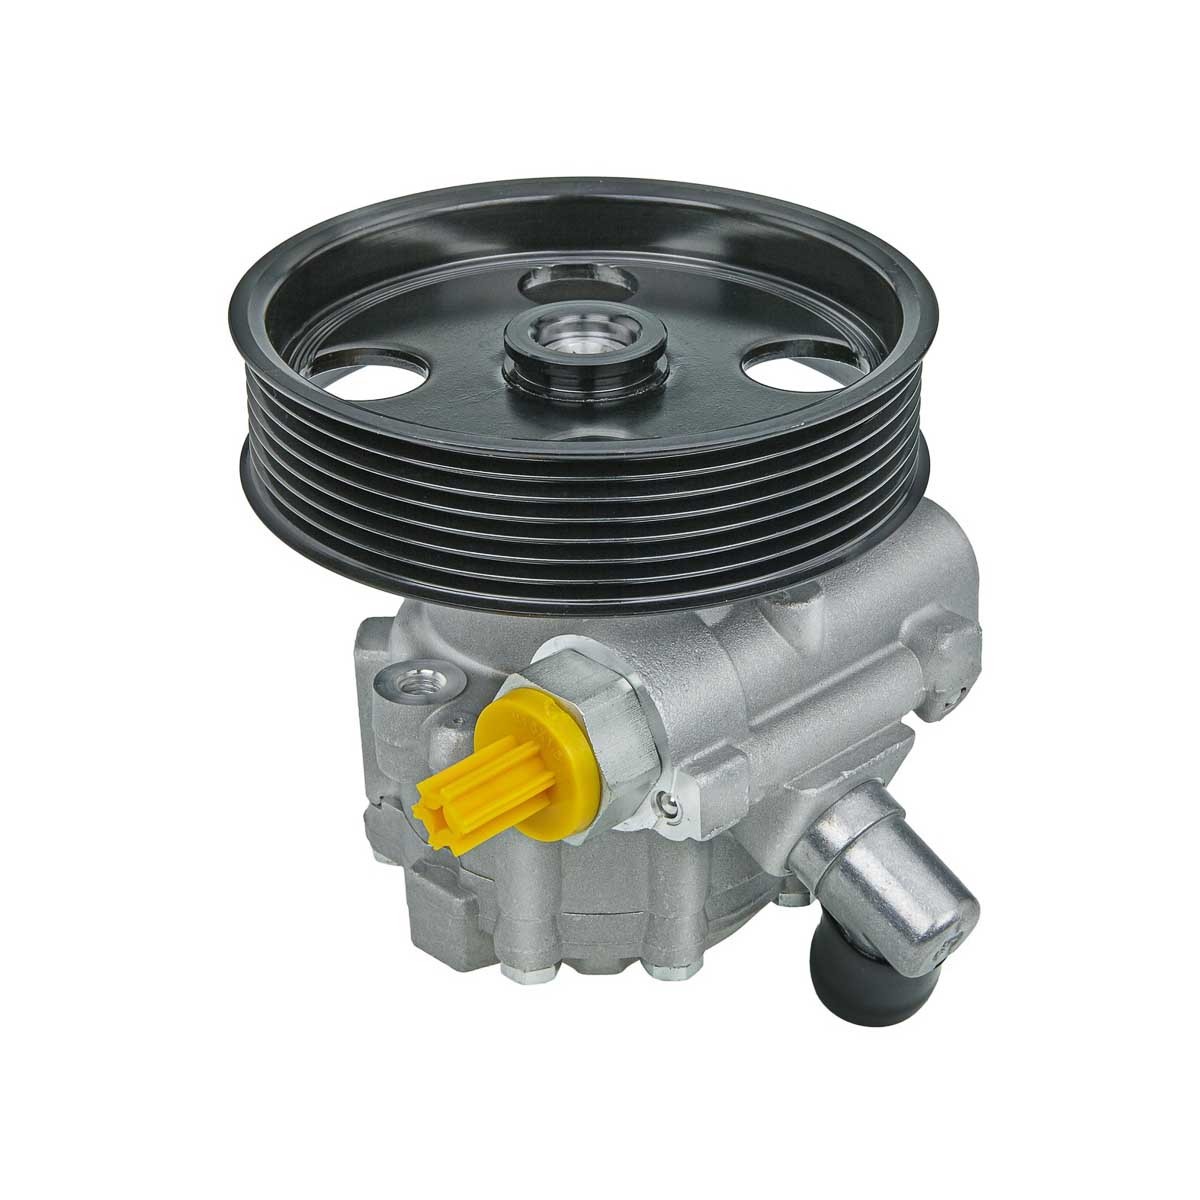 MEYLE 014 631 0032 Power steering pump MERCEDES-BENZ experience and price